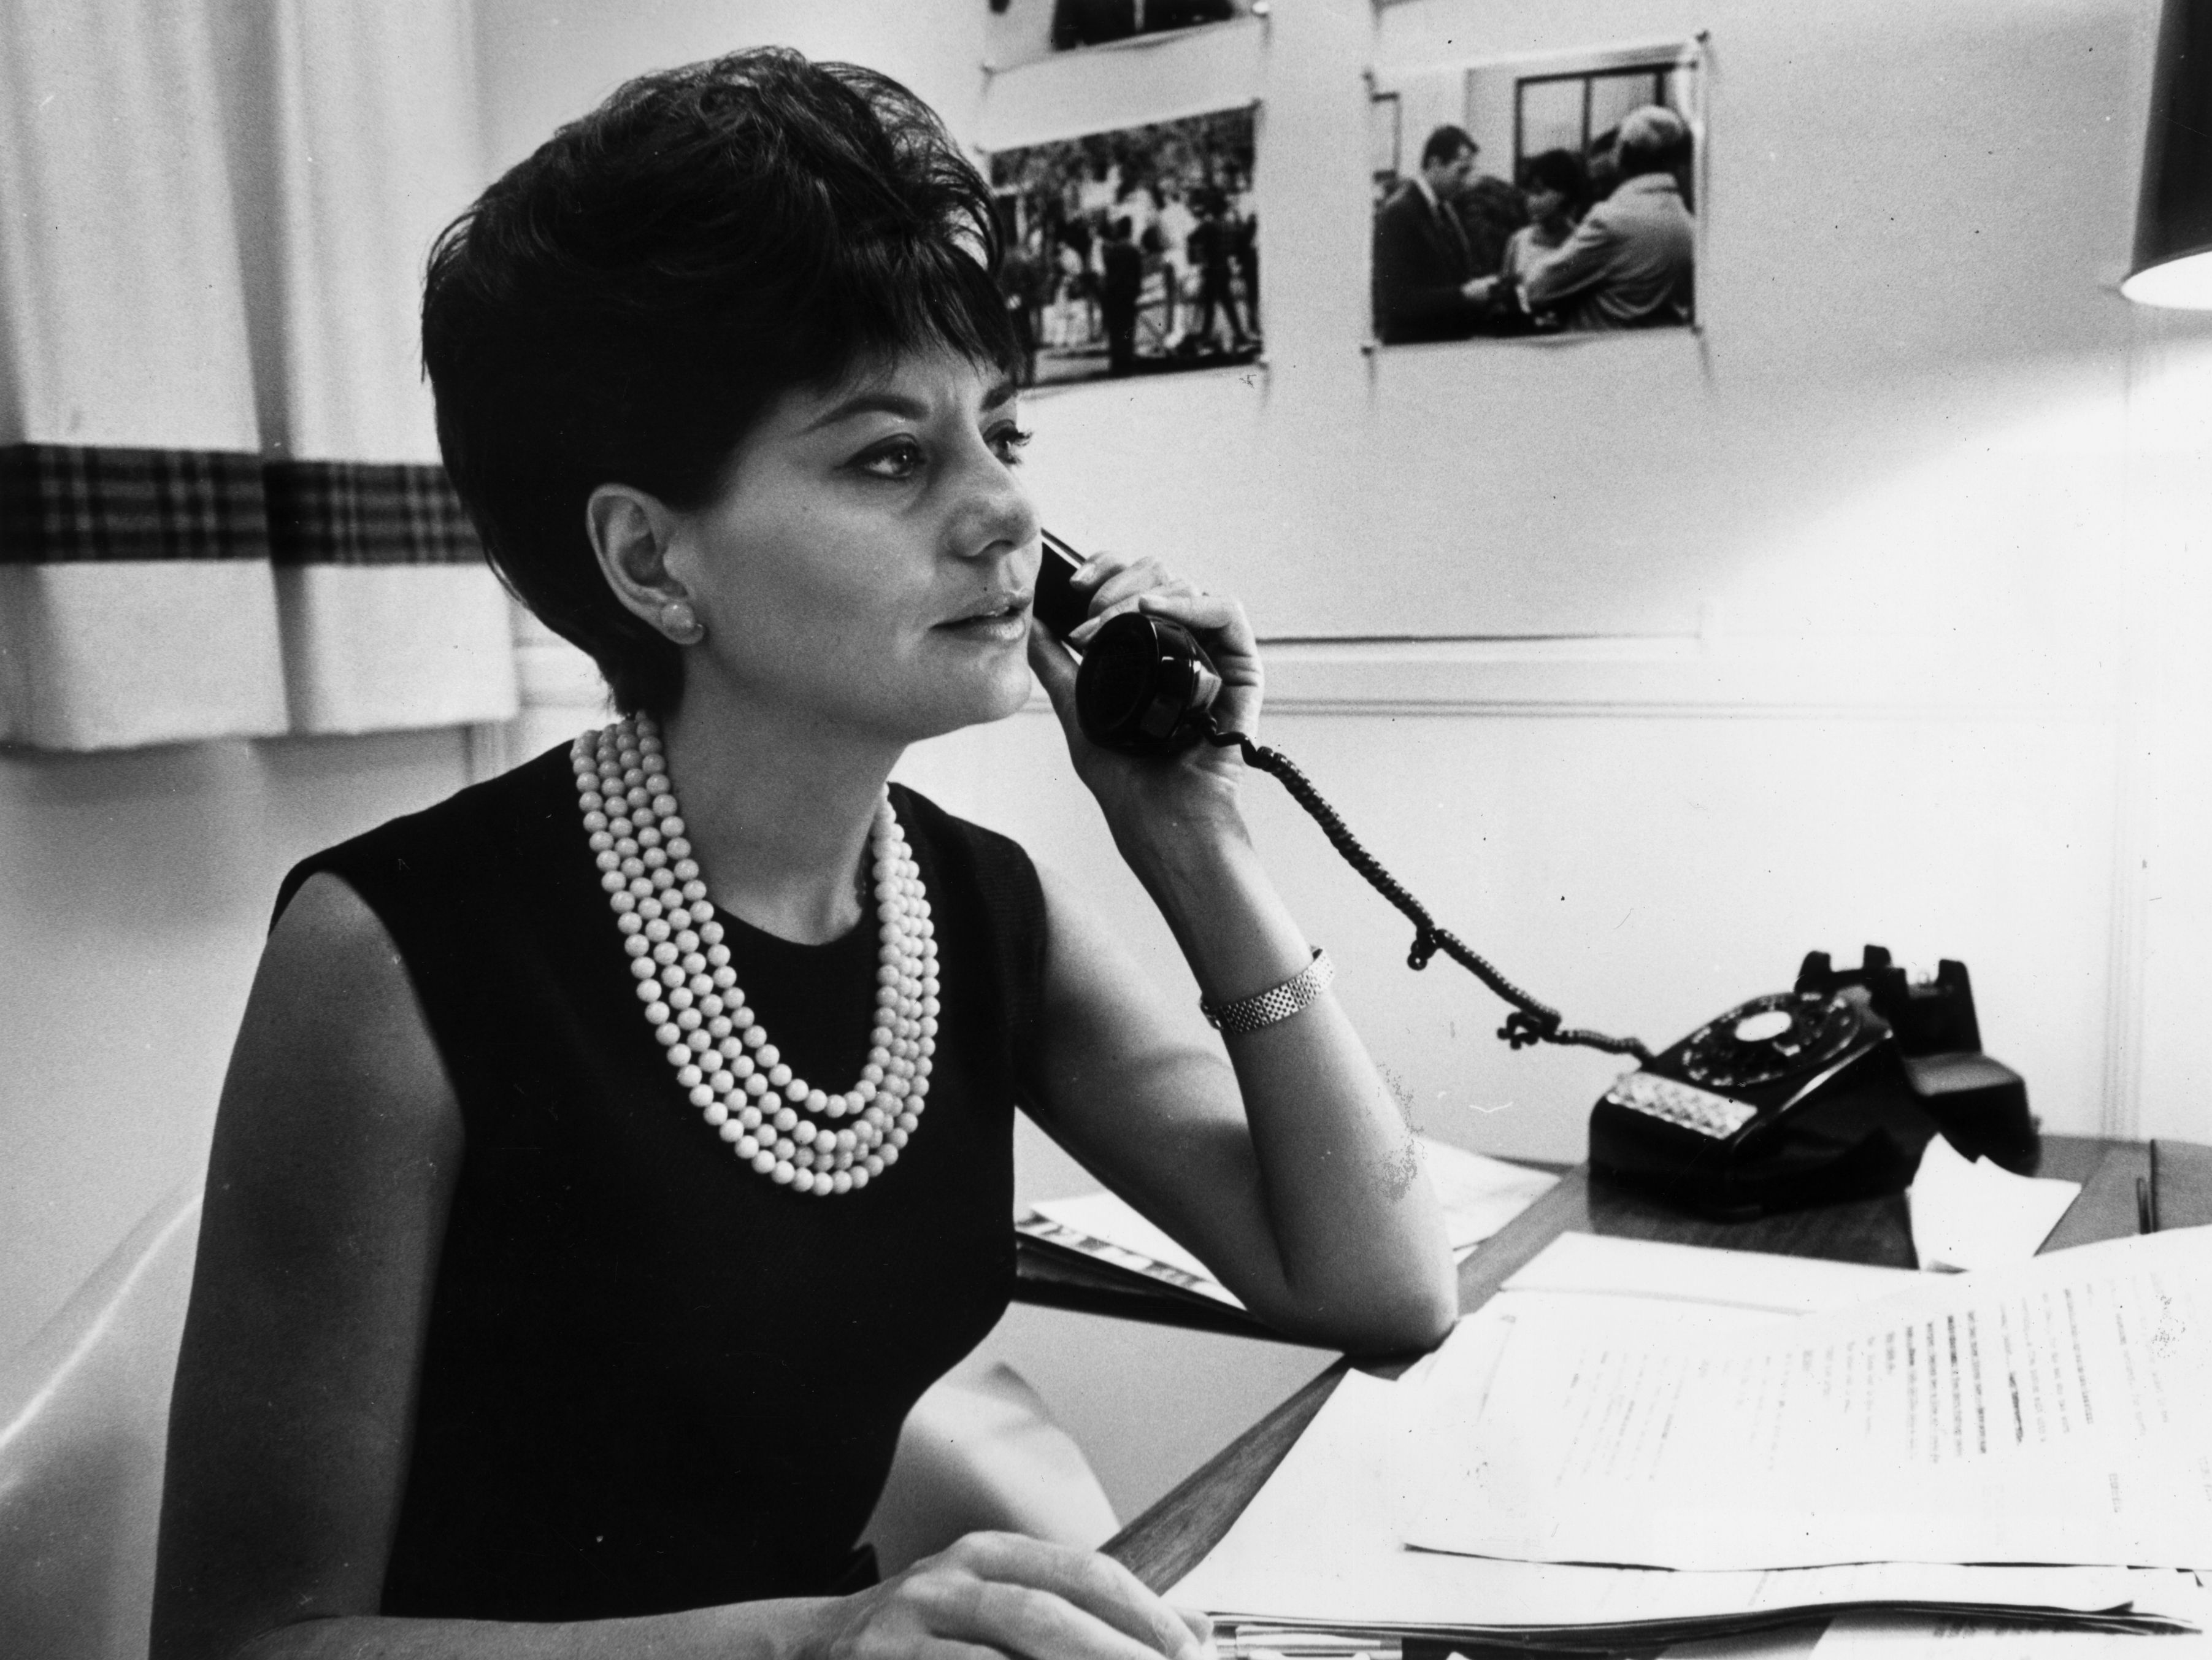 Television journalist for NBC Barbara Walters takes a phone call at her desk, New York City.